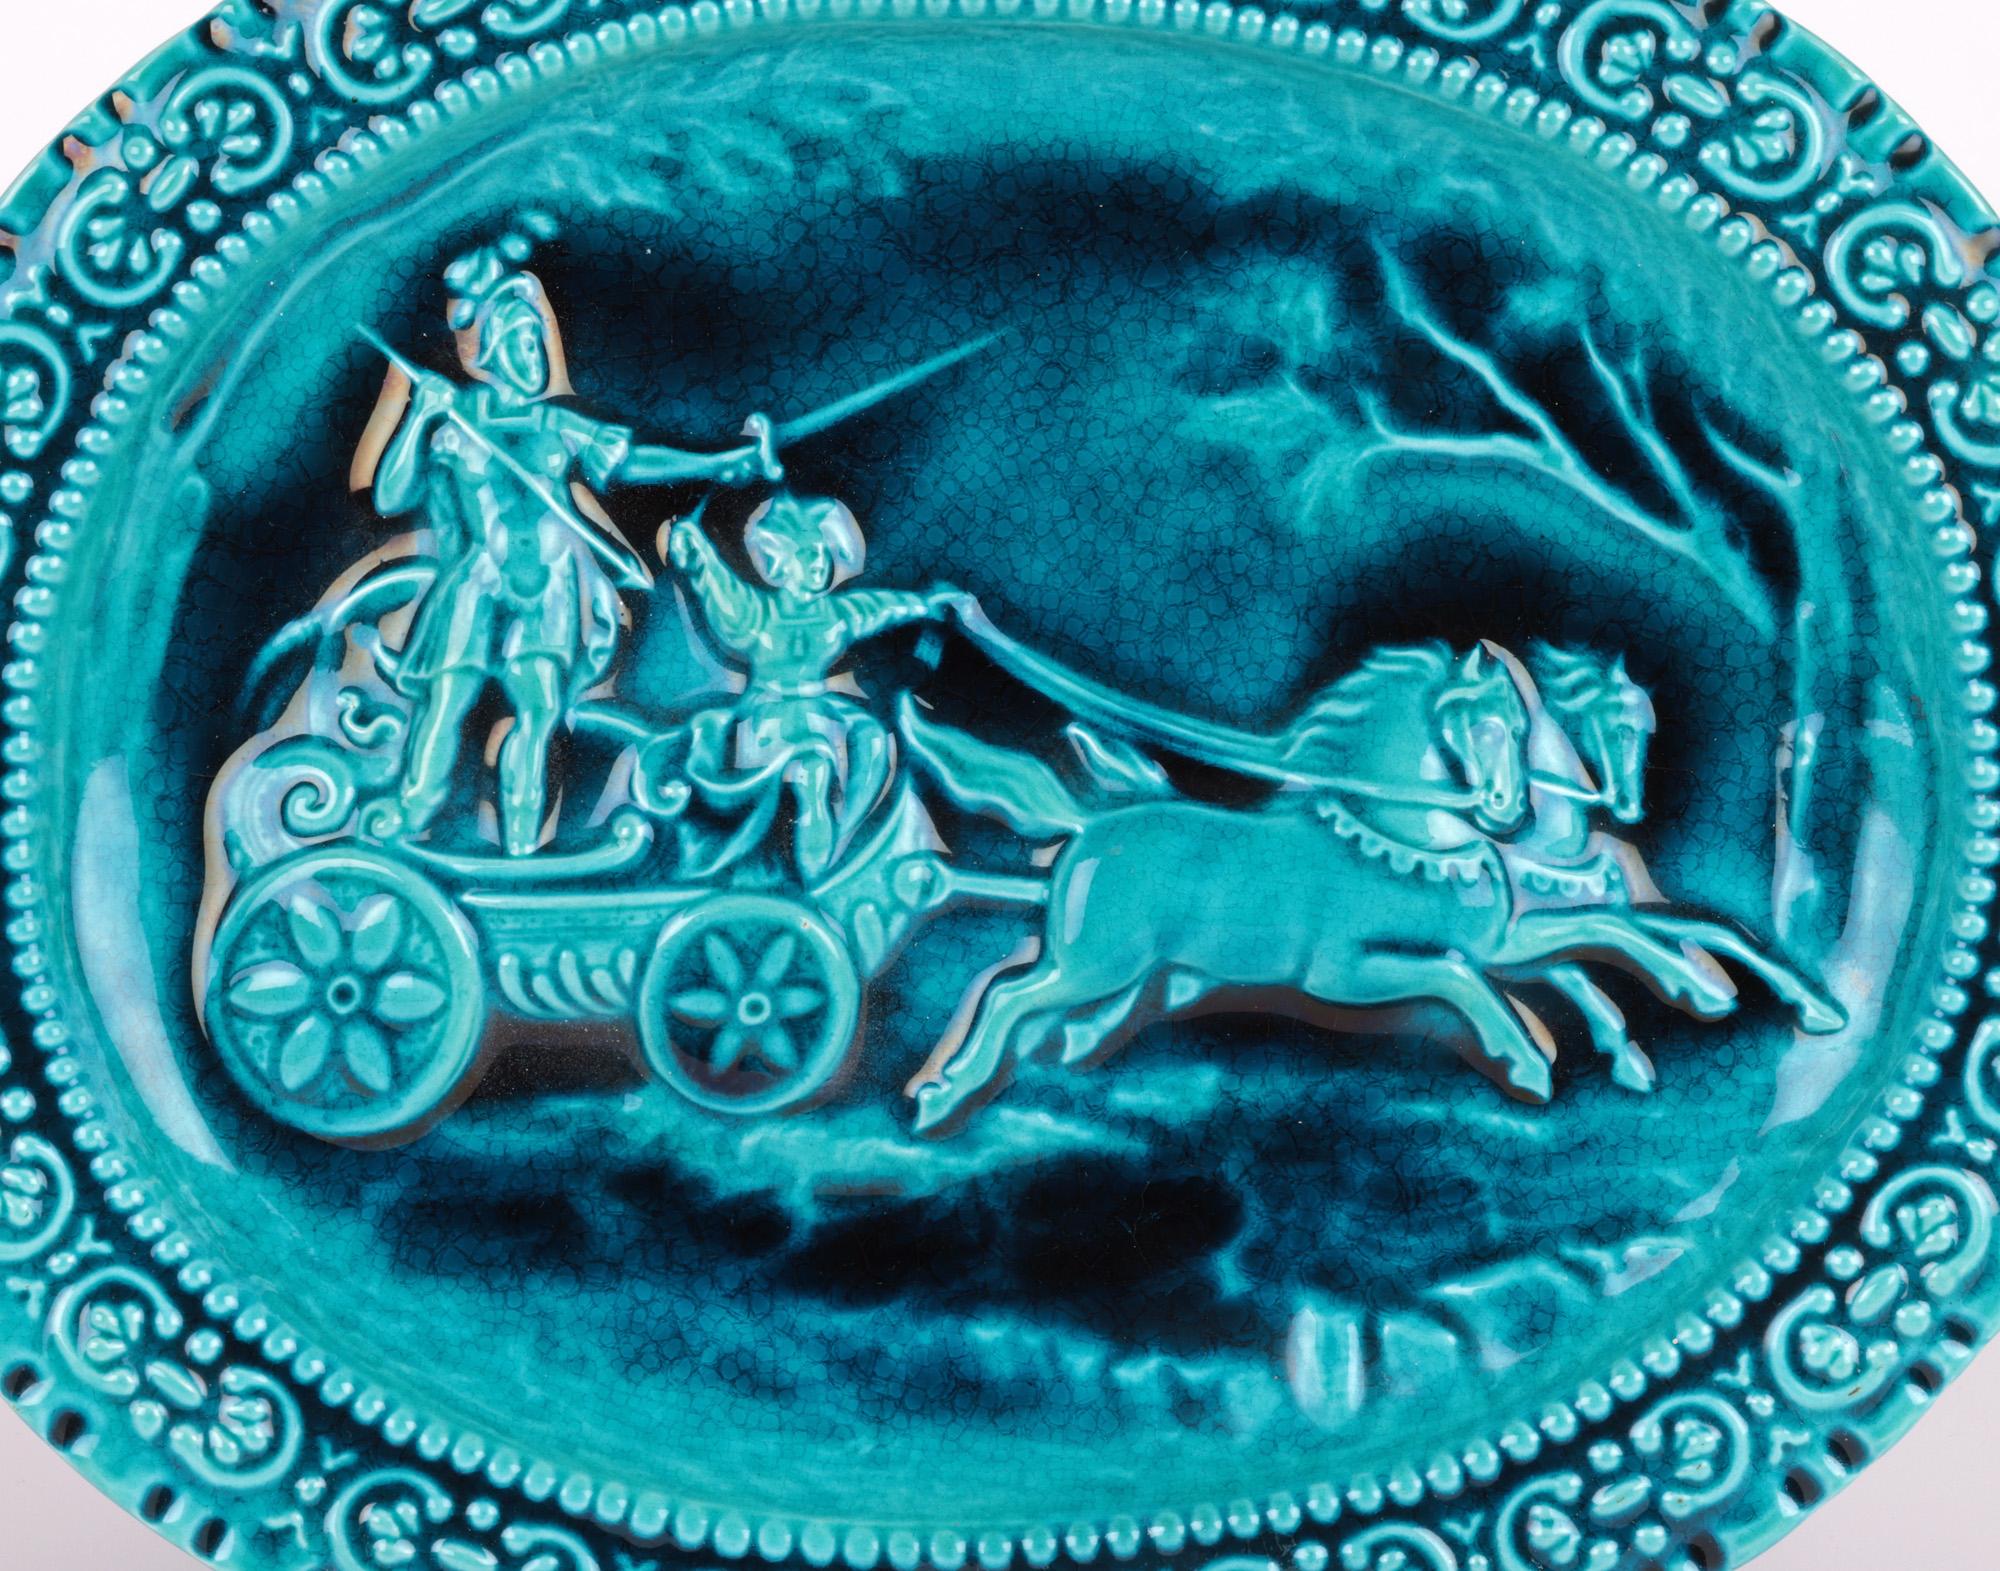 Maw & Co Walter Crane Majolica Chariot Art Pottery Plaque For Sale 5